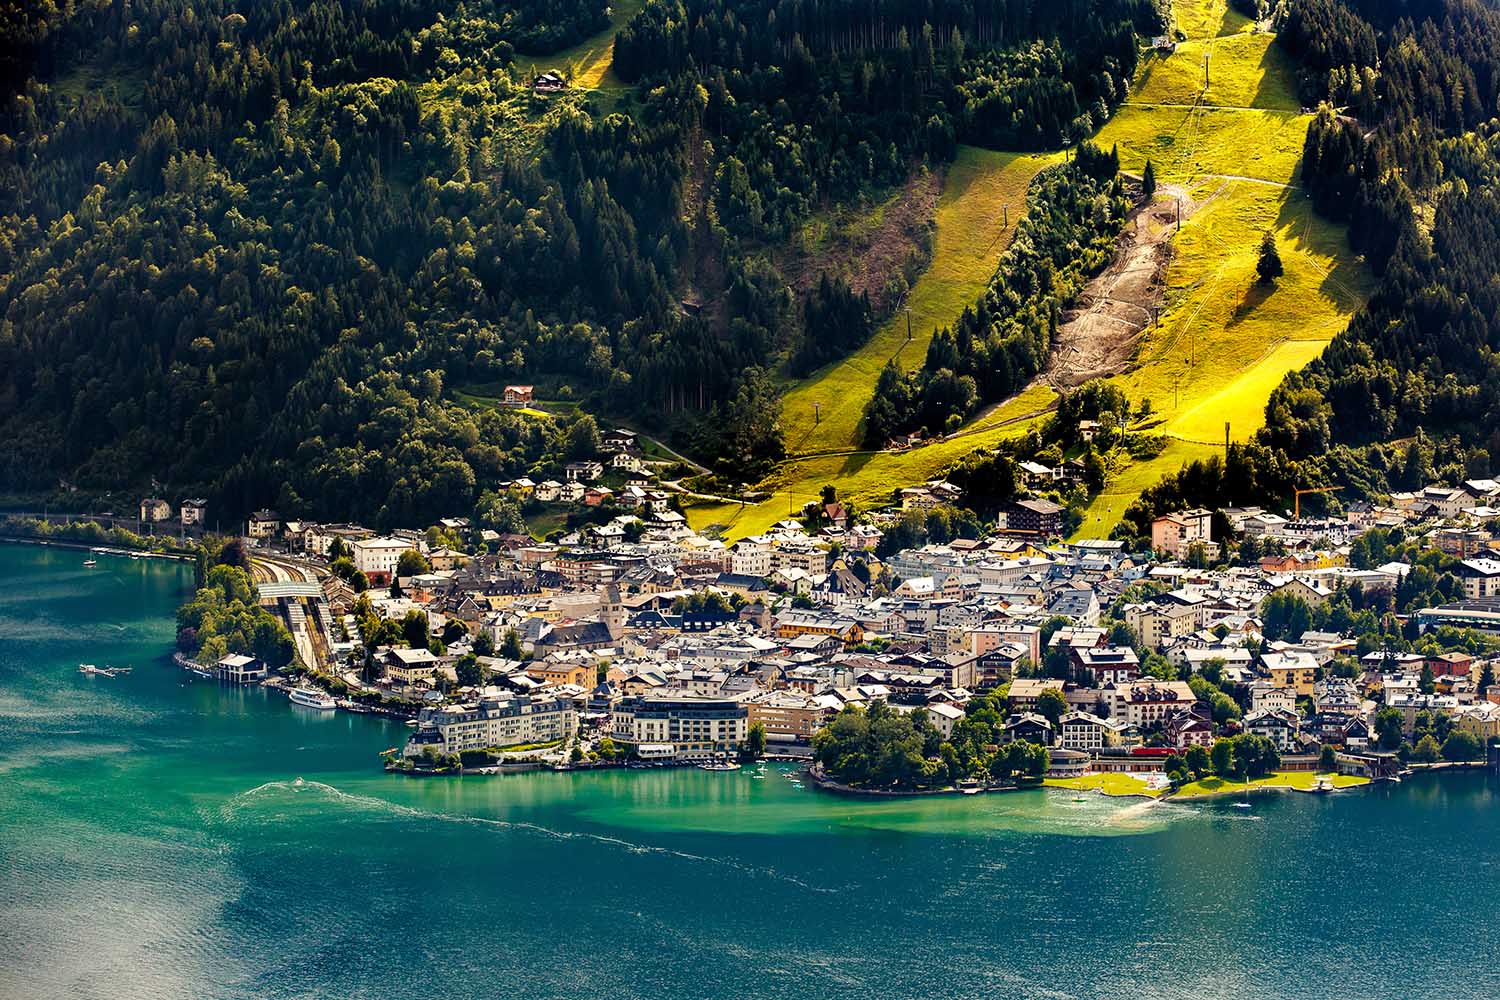 View over Zeller See lake. Center of the alpine city Zell am See